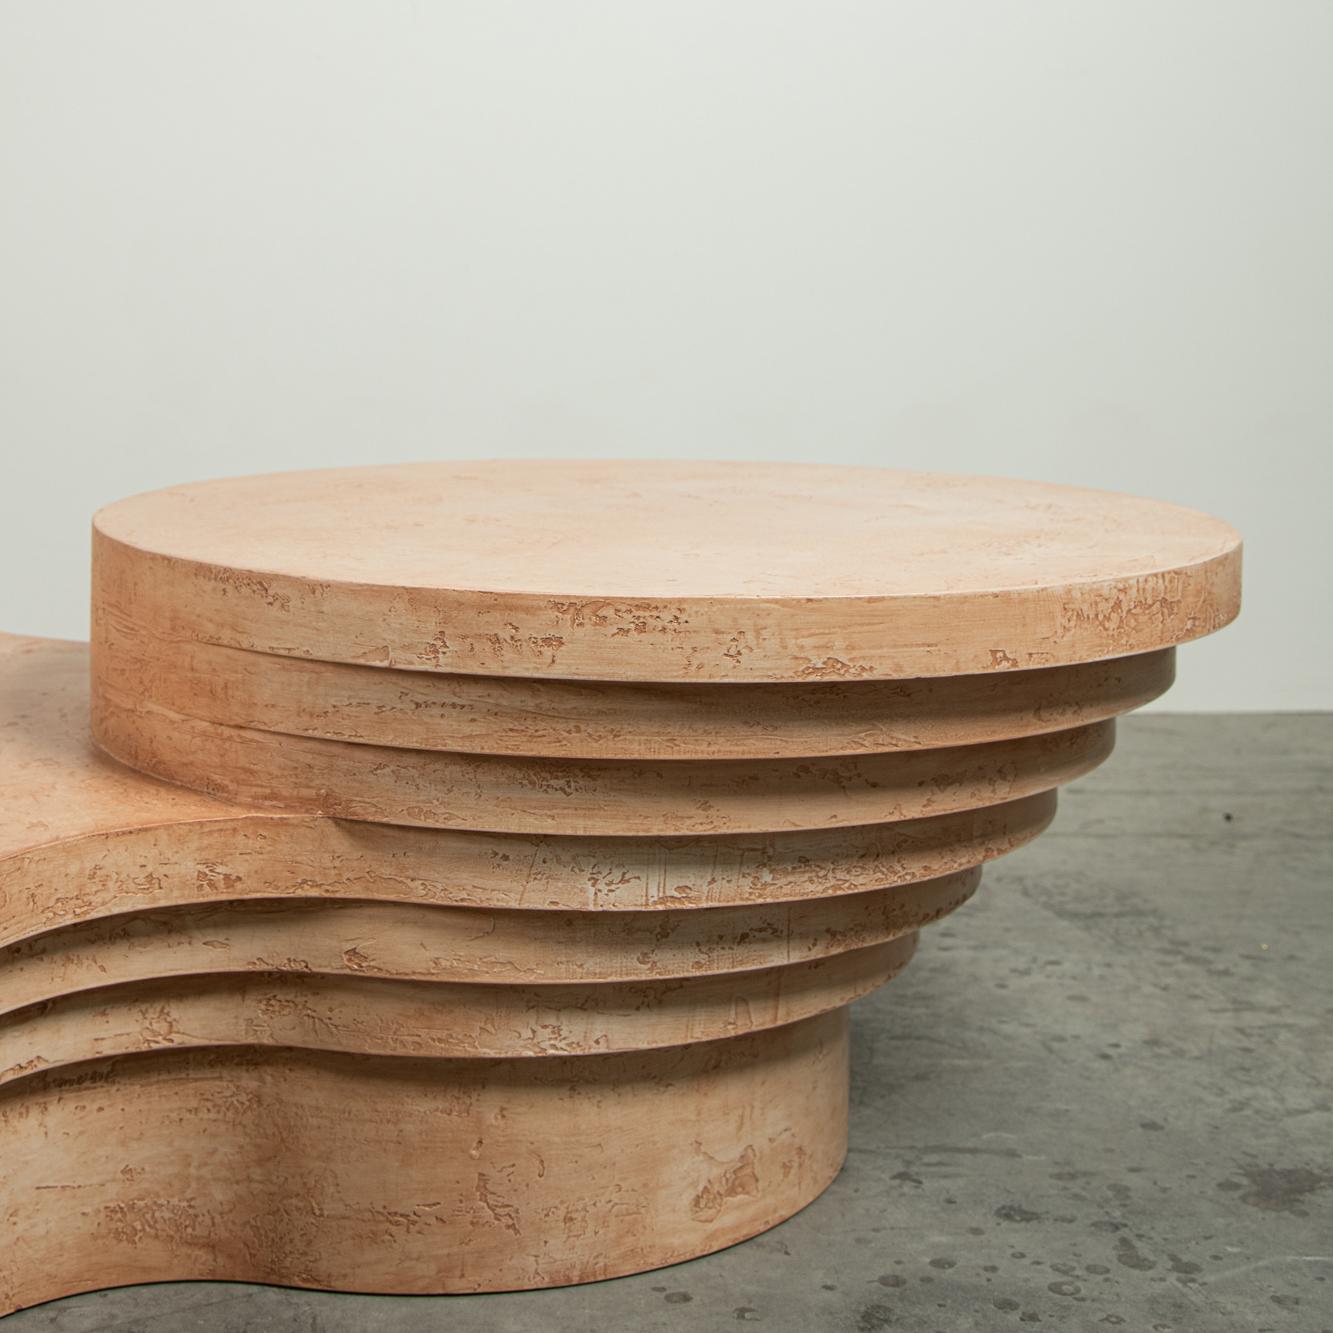 Contemporary Slice Me Up Sculptural Coffee Table by Pietro Franceschini